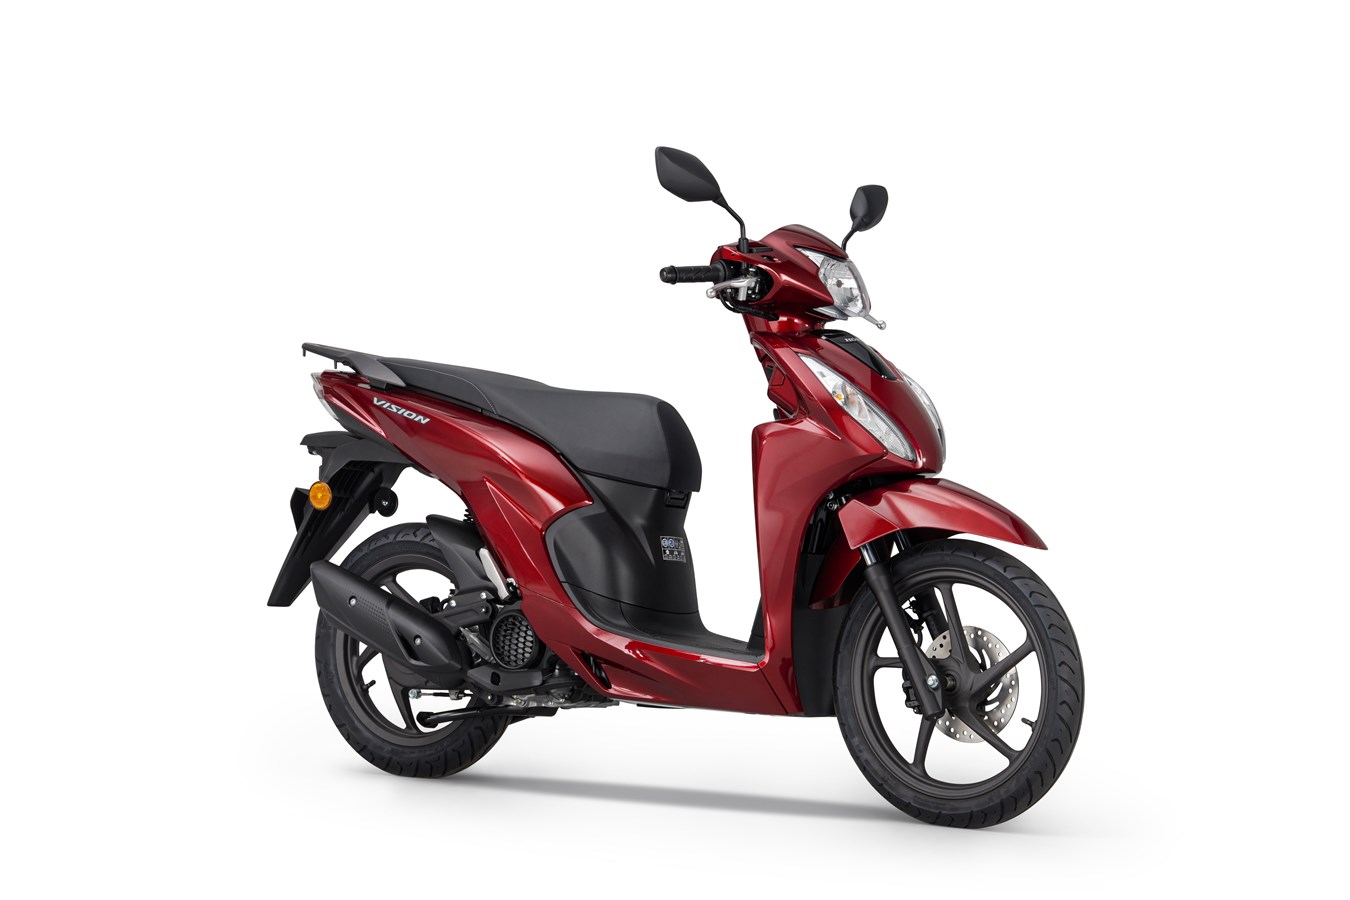 Vision 110 joins Honda’s comprehensive range of A1 licence-compatible 125cc scooters and motorcycles for 2021 